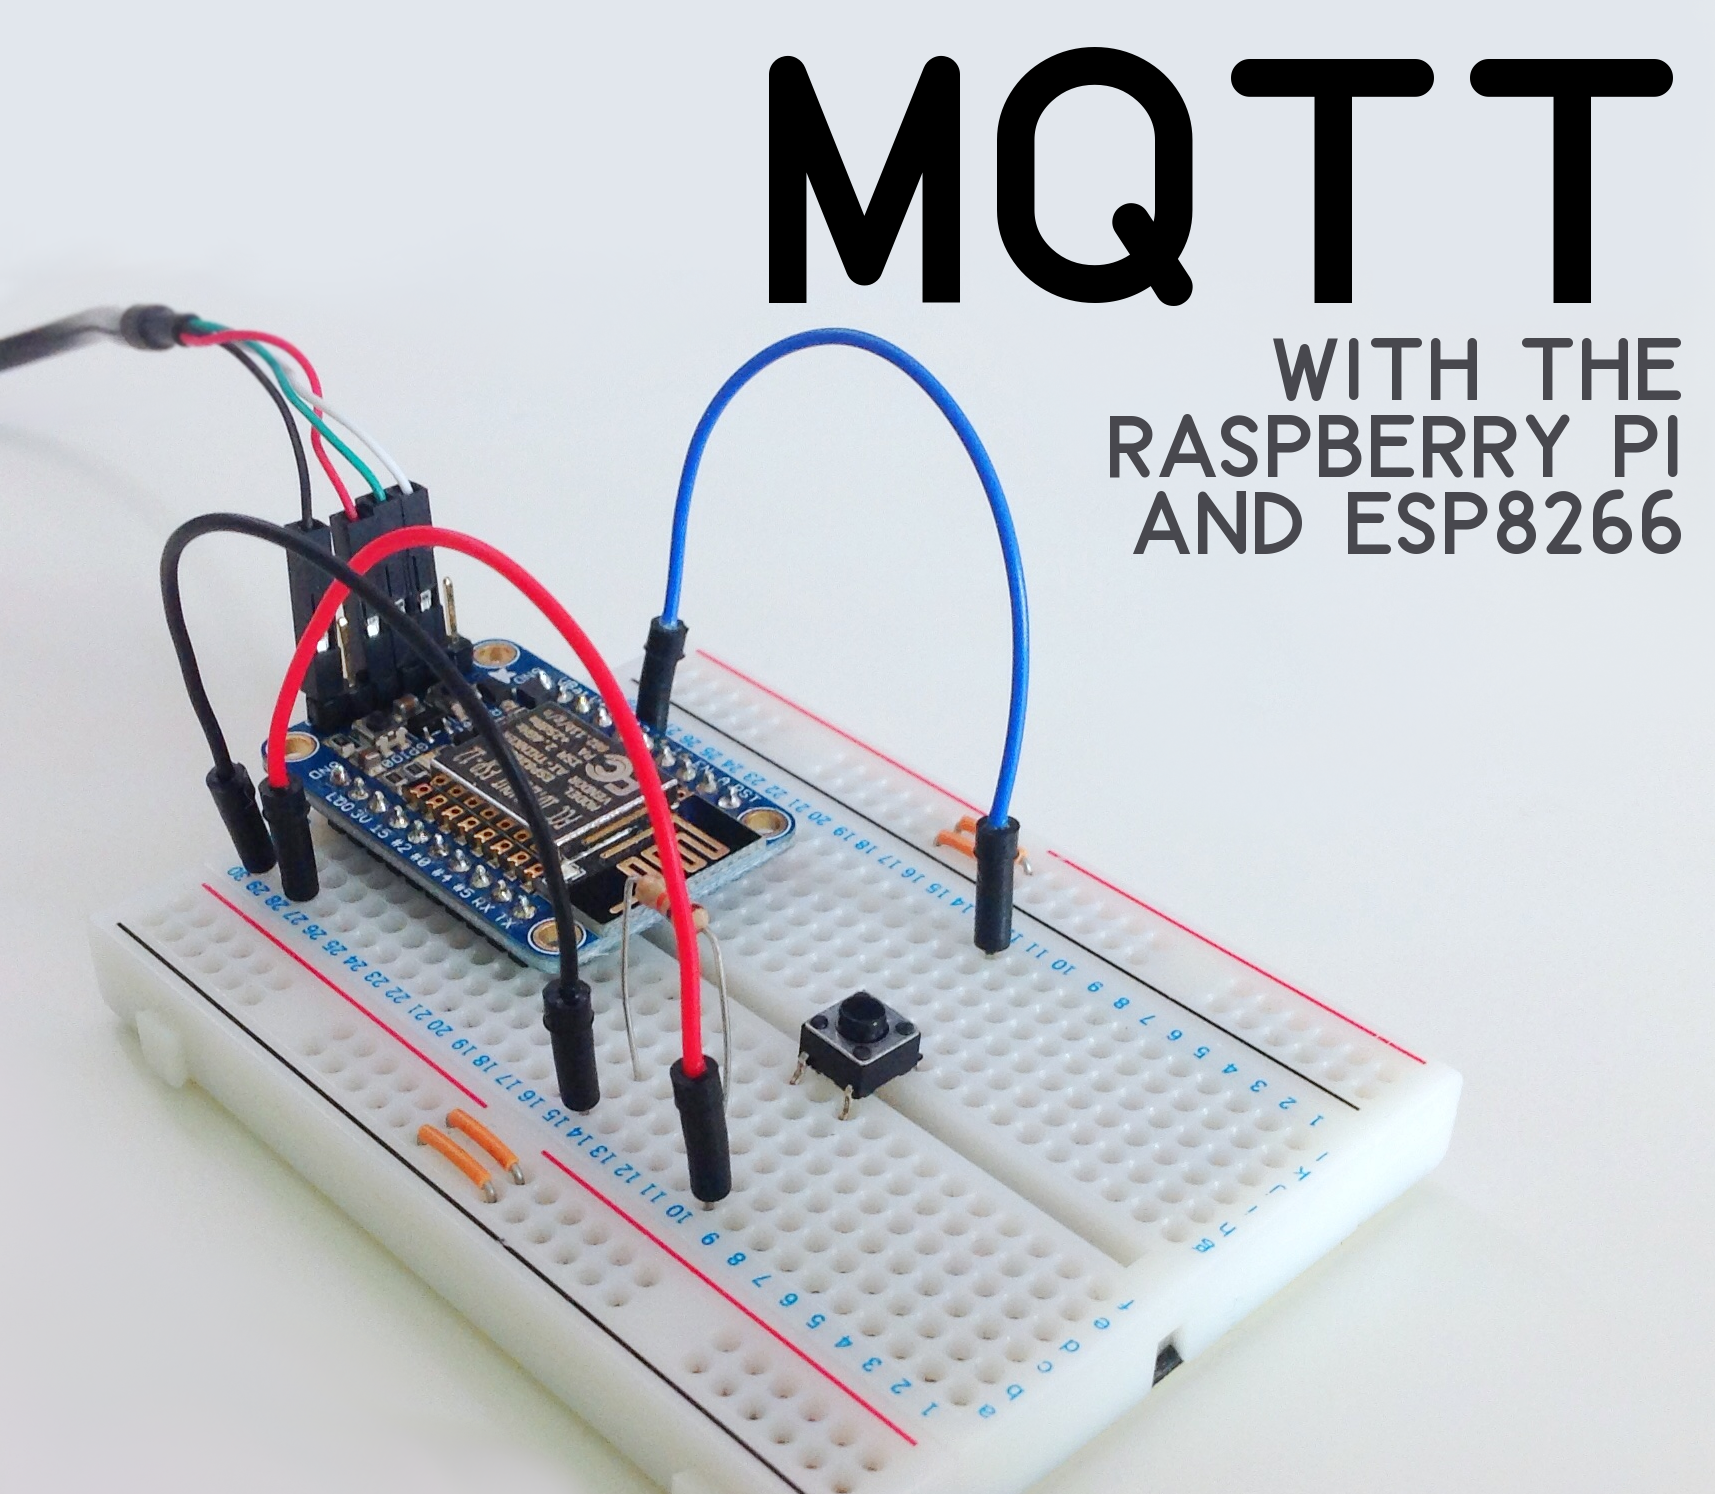 How to Use MQTT With the Raspberry Pi and ESP8266